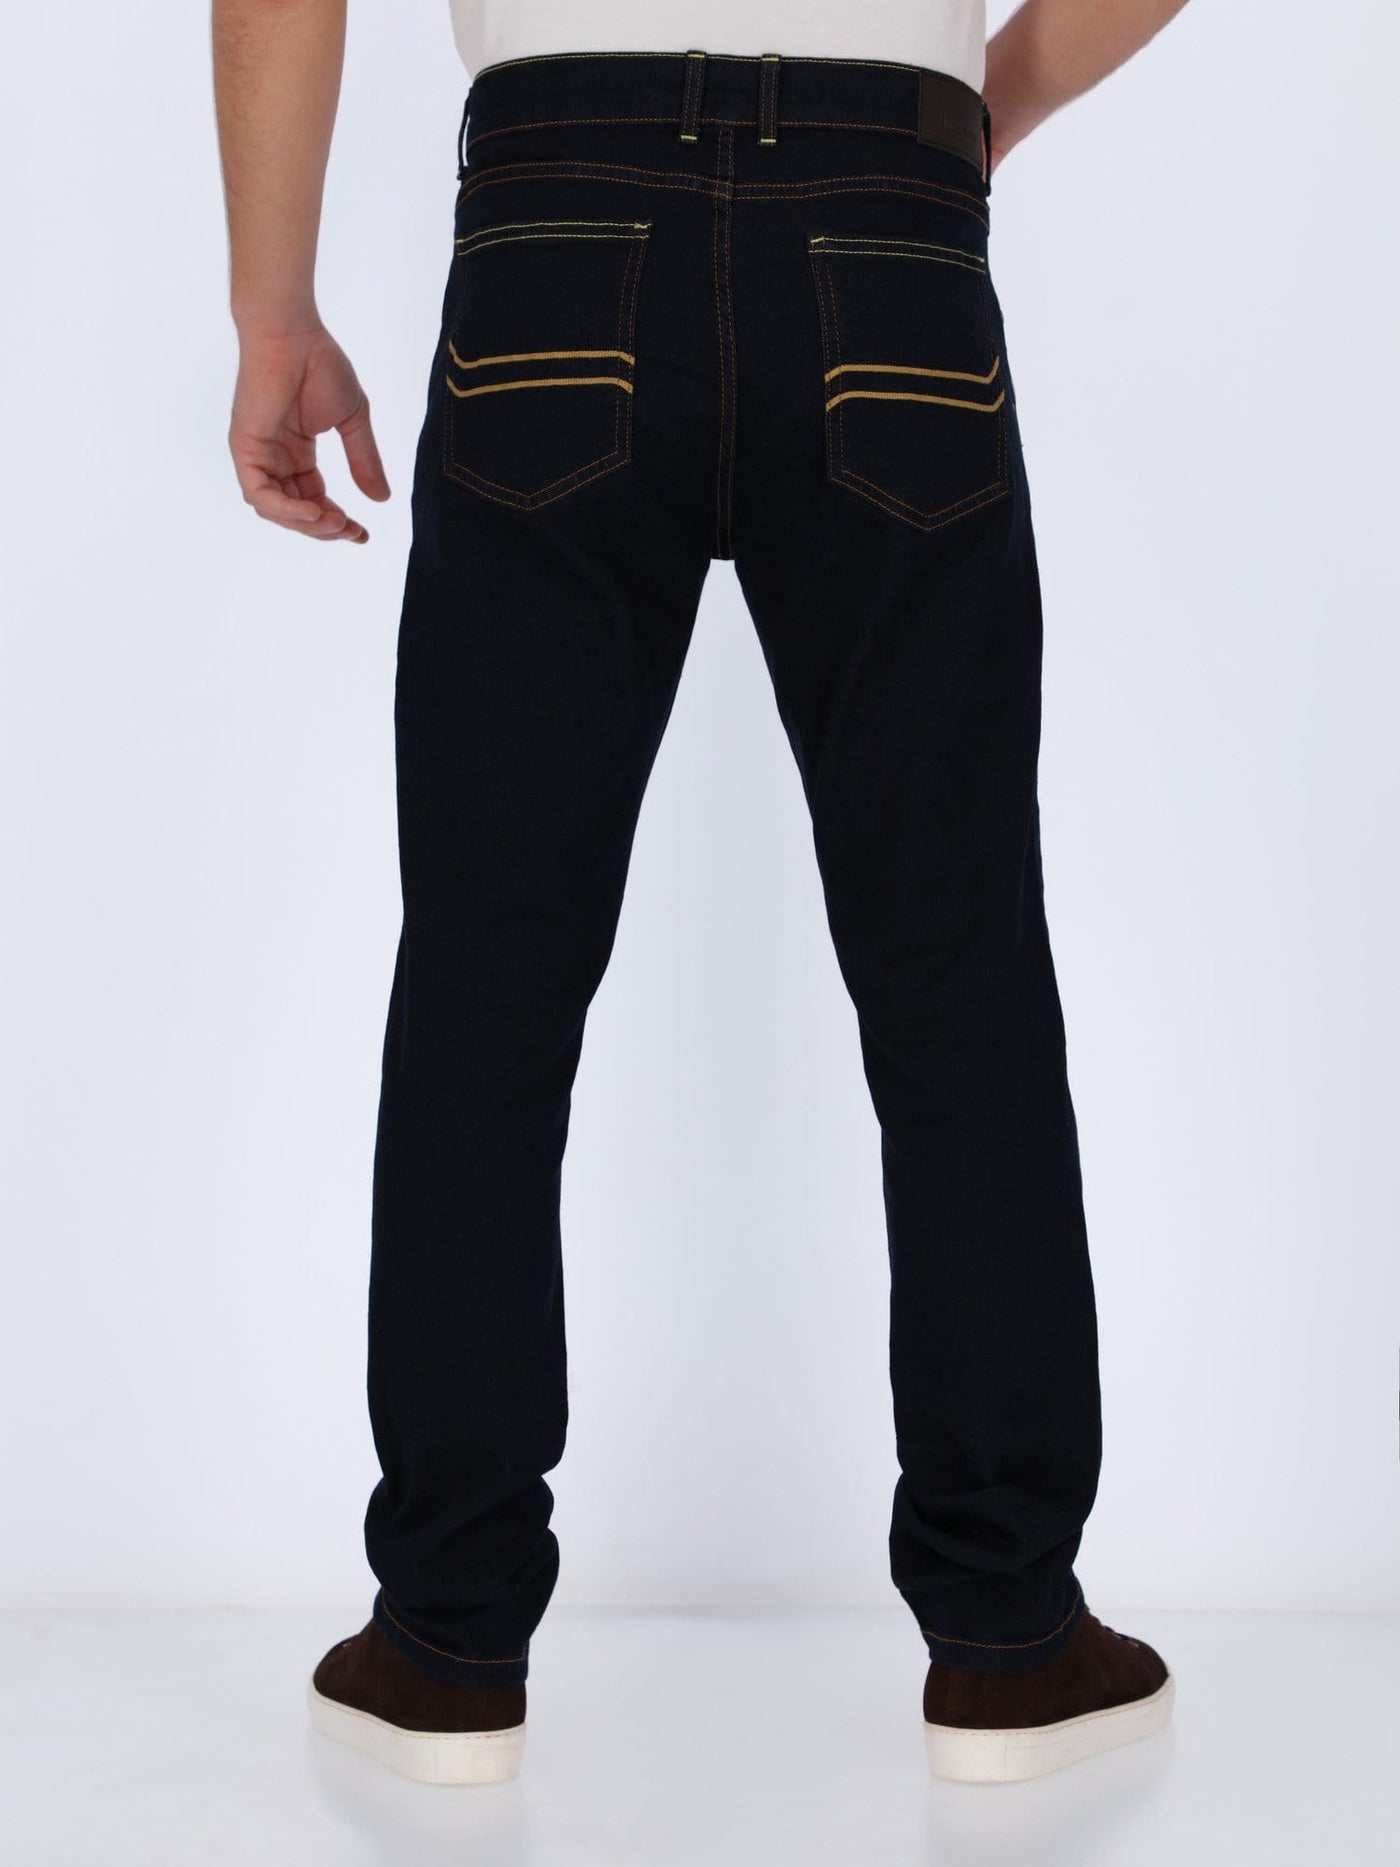 Daniel Hechter Pants & Shorts Jeans Pants with Stitched Back Pockets